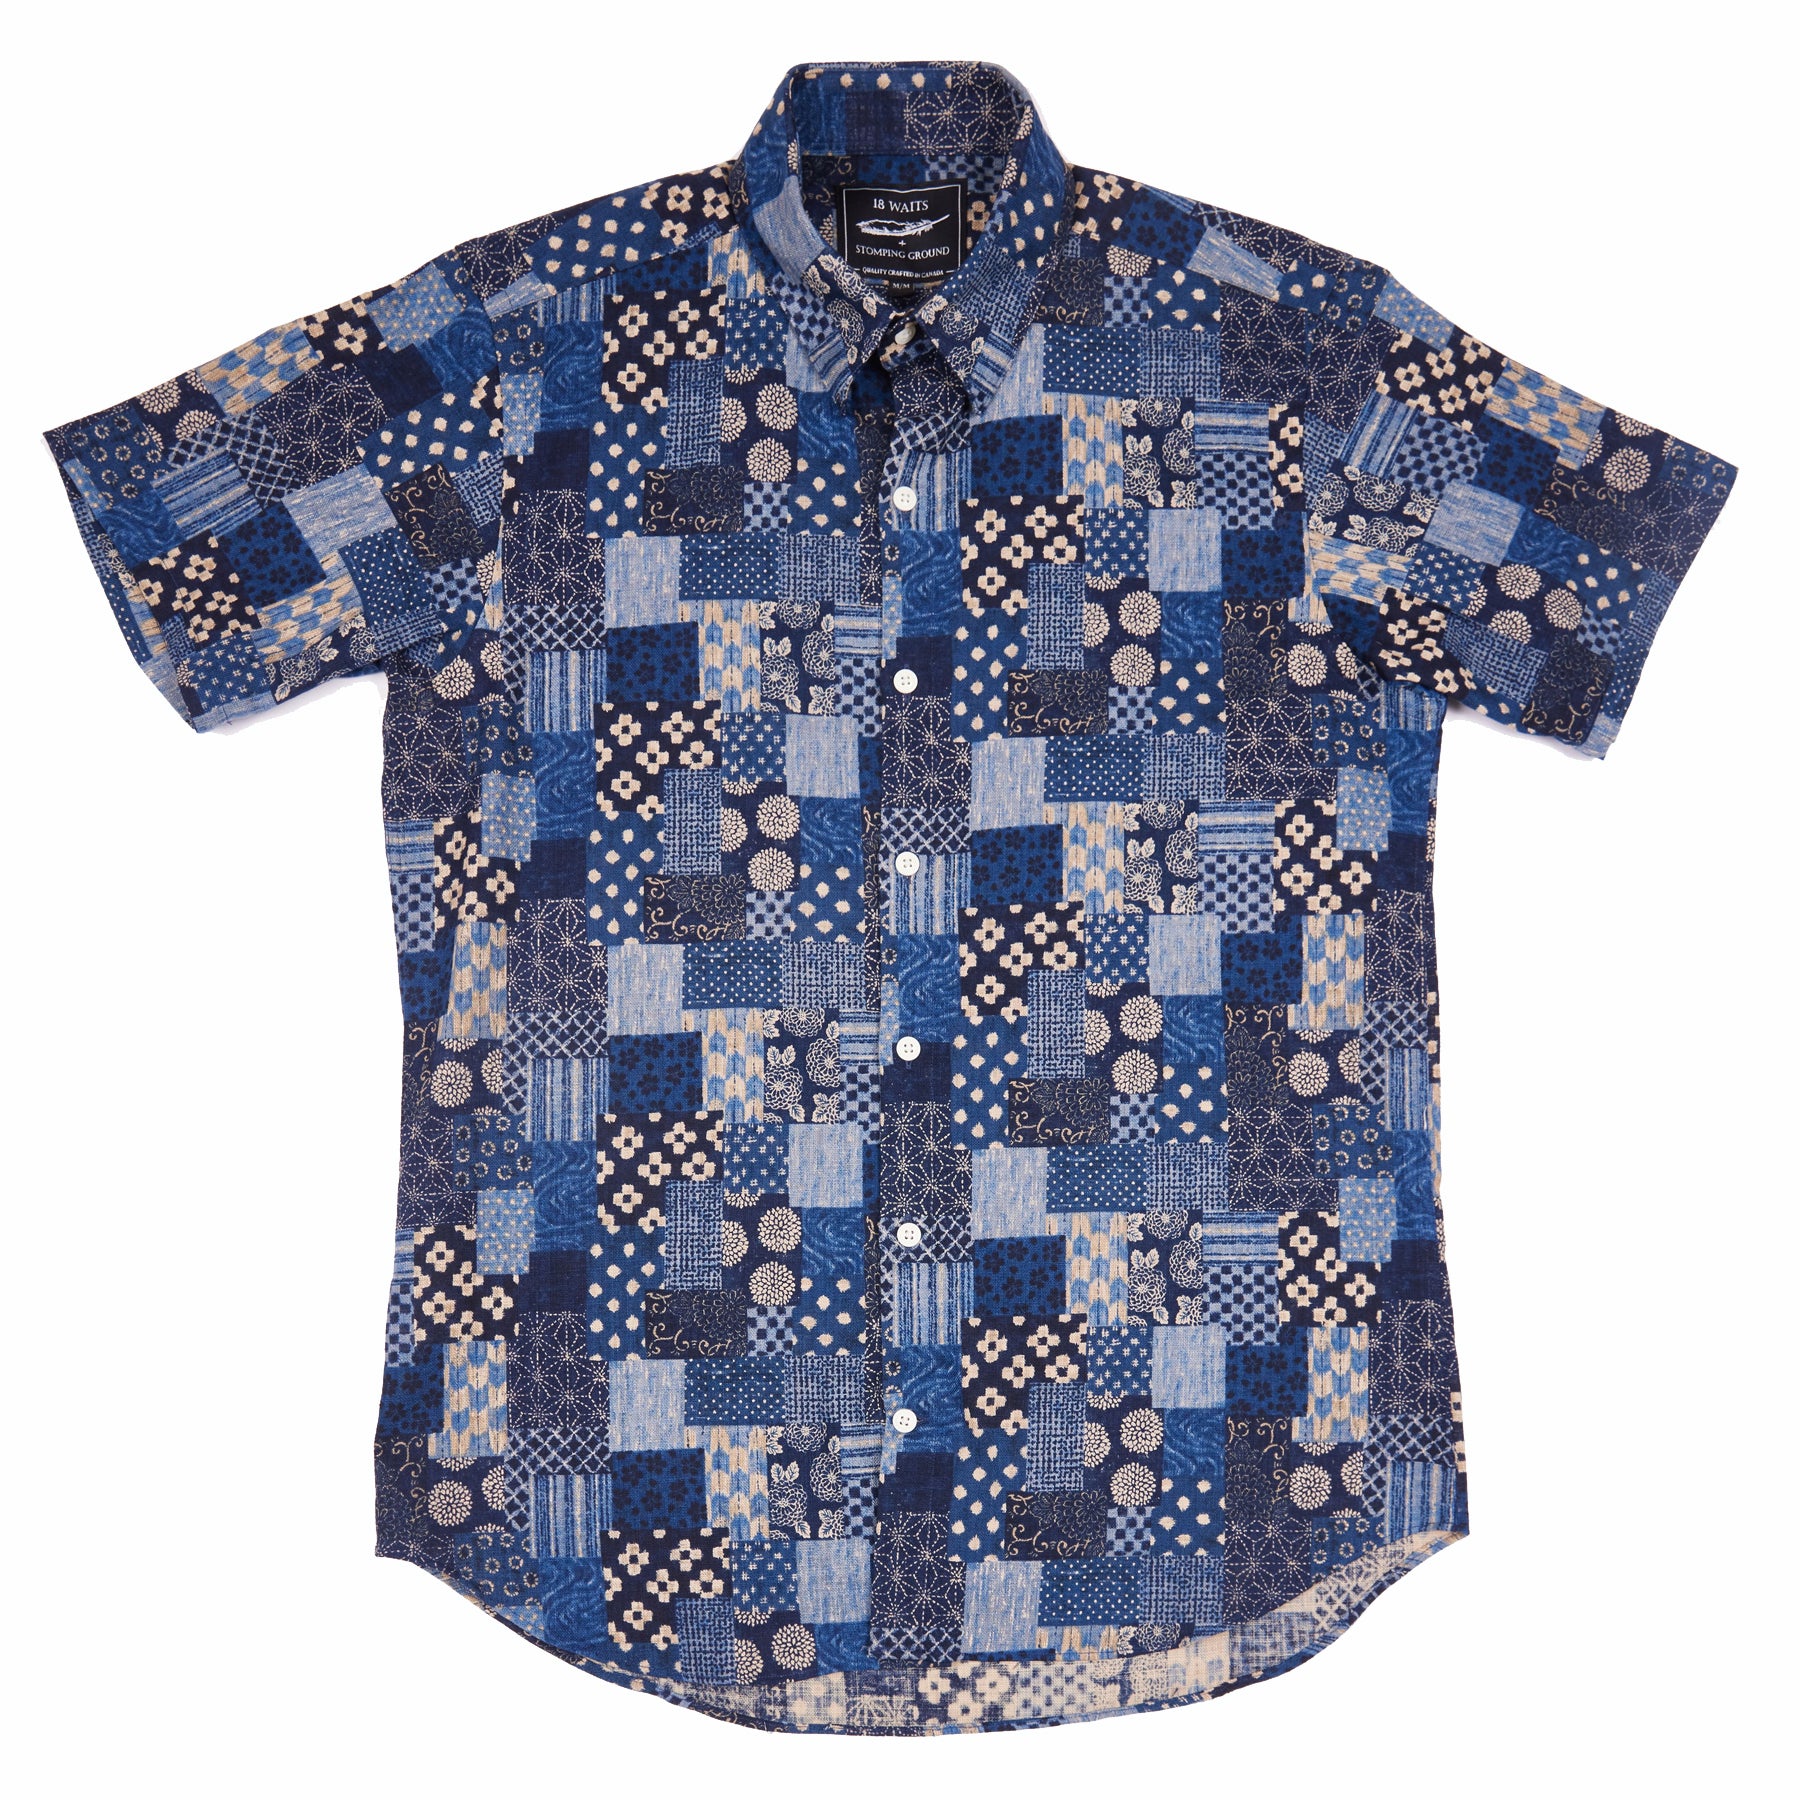 S/S Dylan Shirt - Stomping Ground exclusive INDIGO PATCHWORK
Slim fit
• 100% Made in Canada• 100% Cotton 18 WAITS